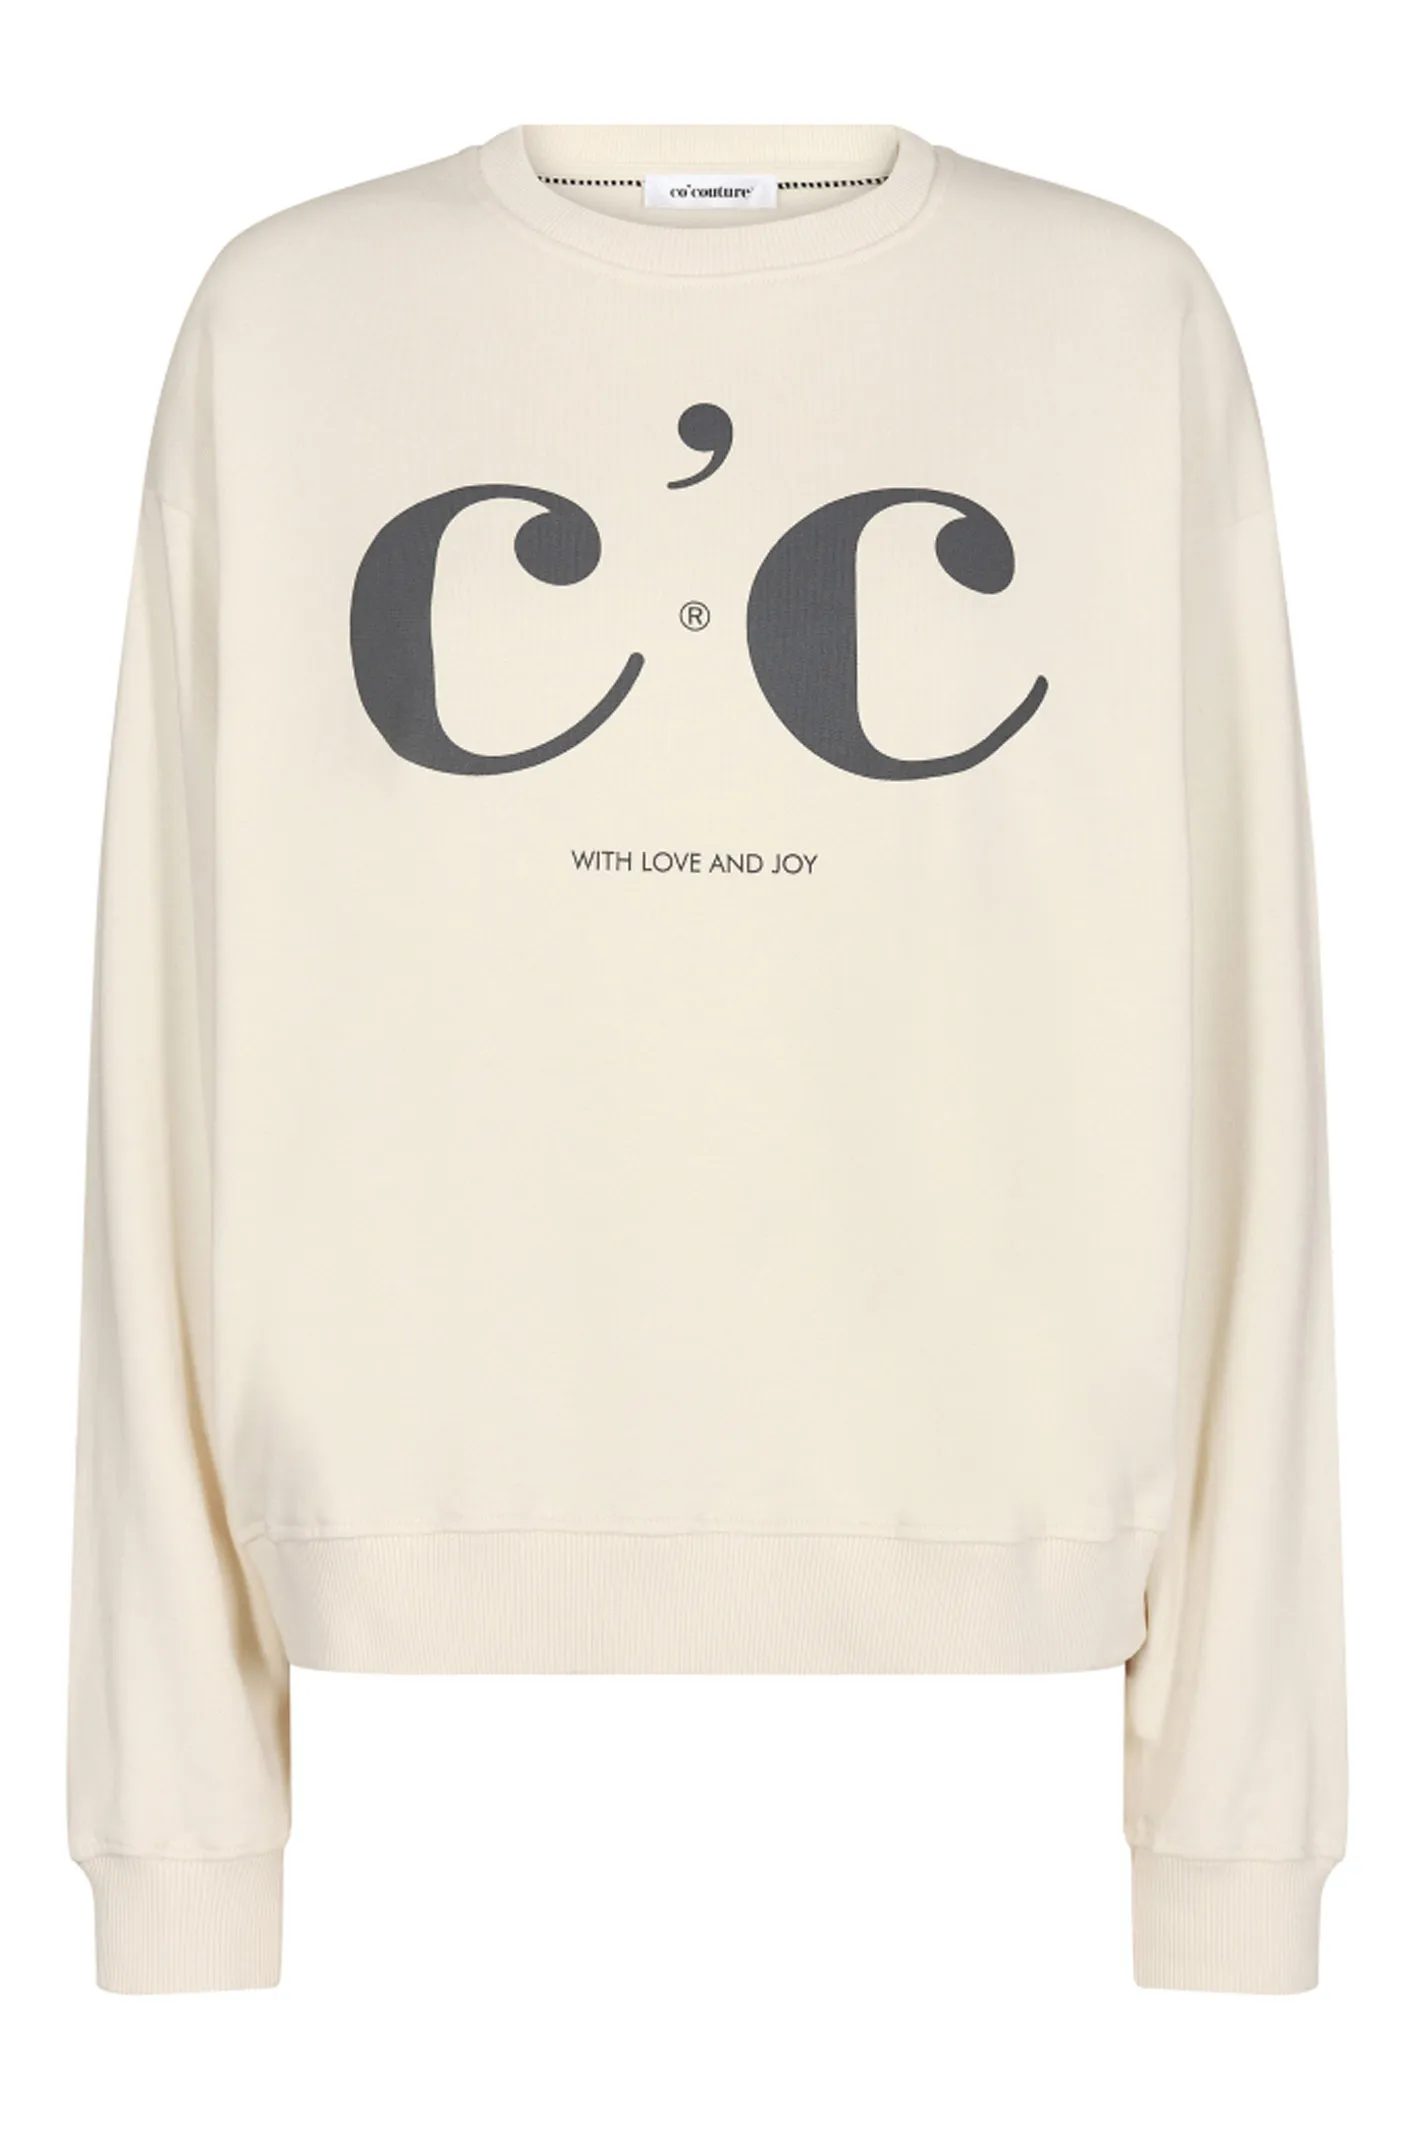 97043 SWEATSHIRTS WHITE fra CO'COUTURE.